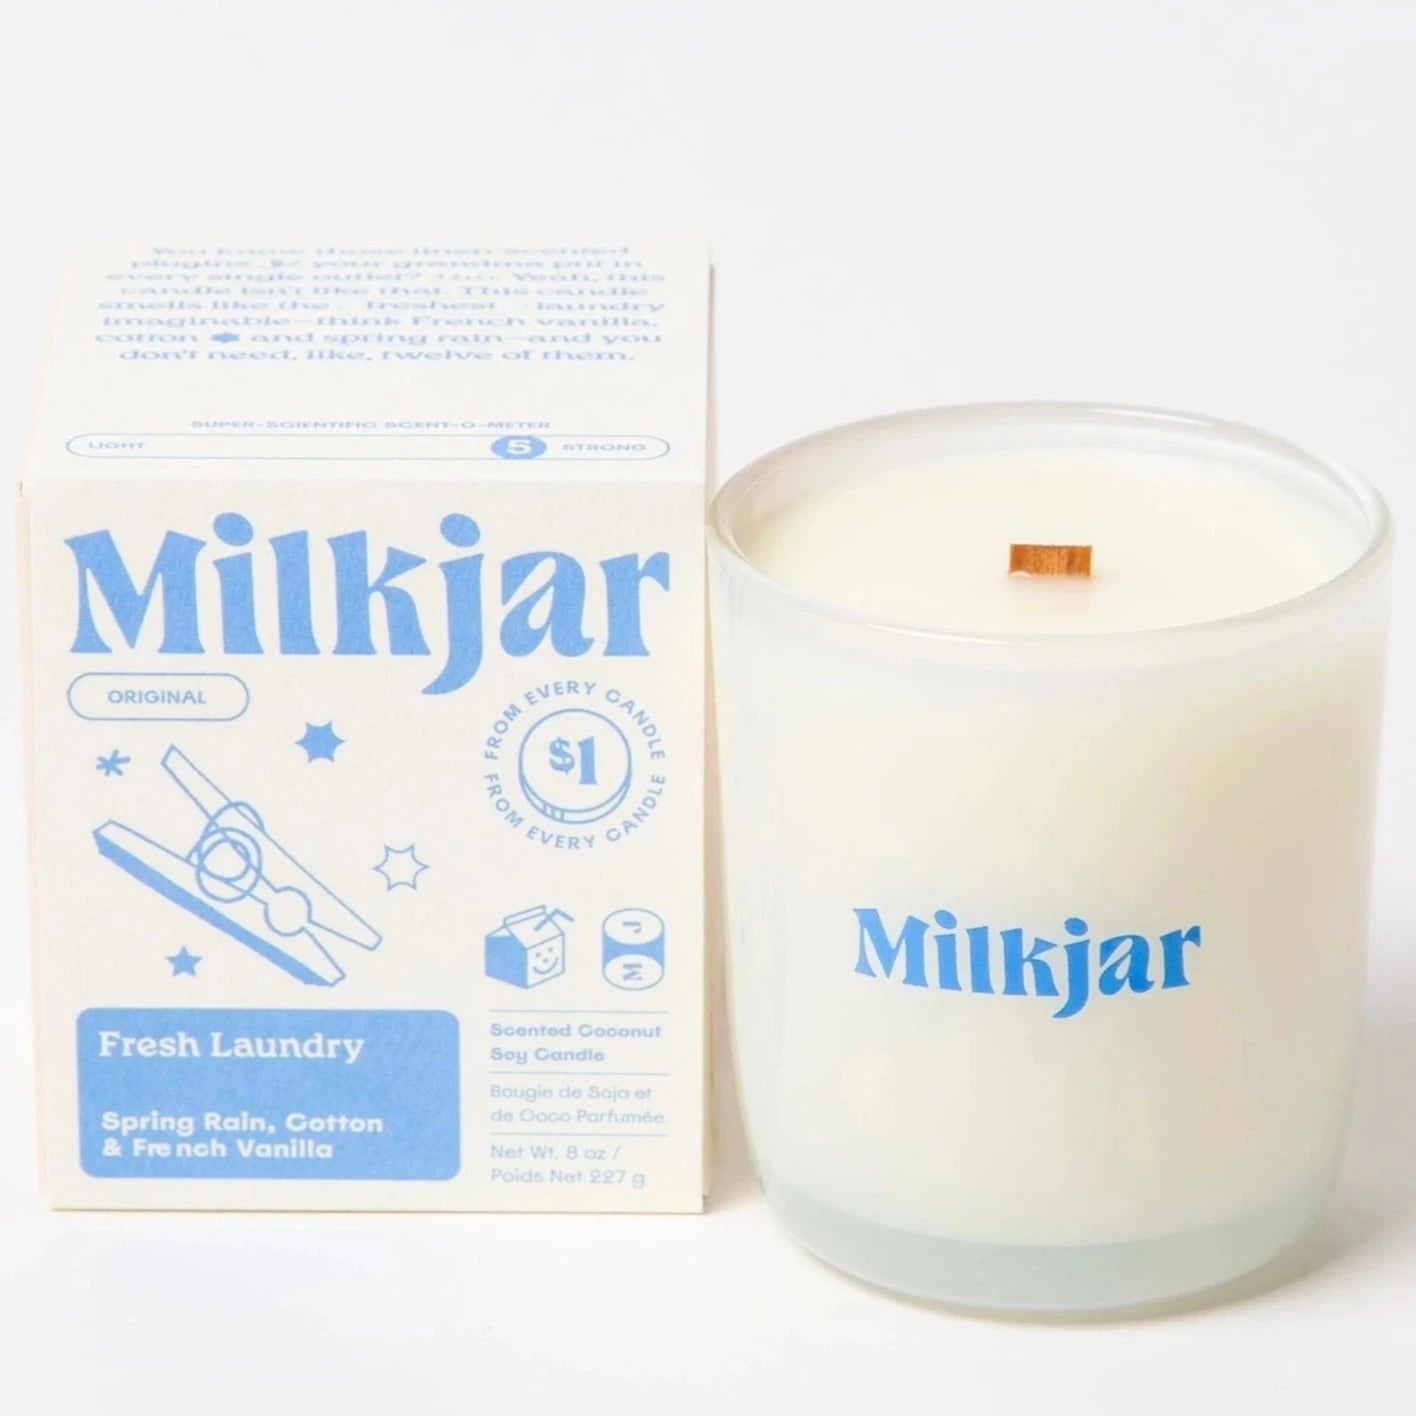 clear glass candle with "MILKJAR" printed on it in blue next to packaging box 